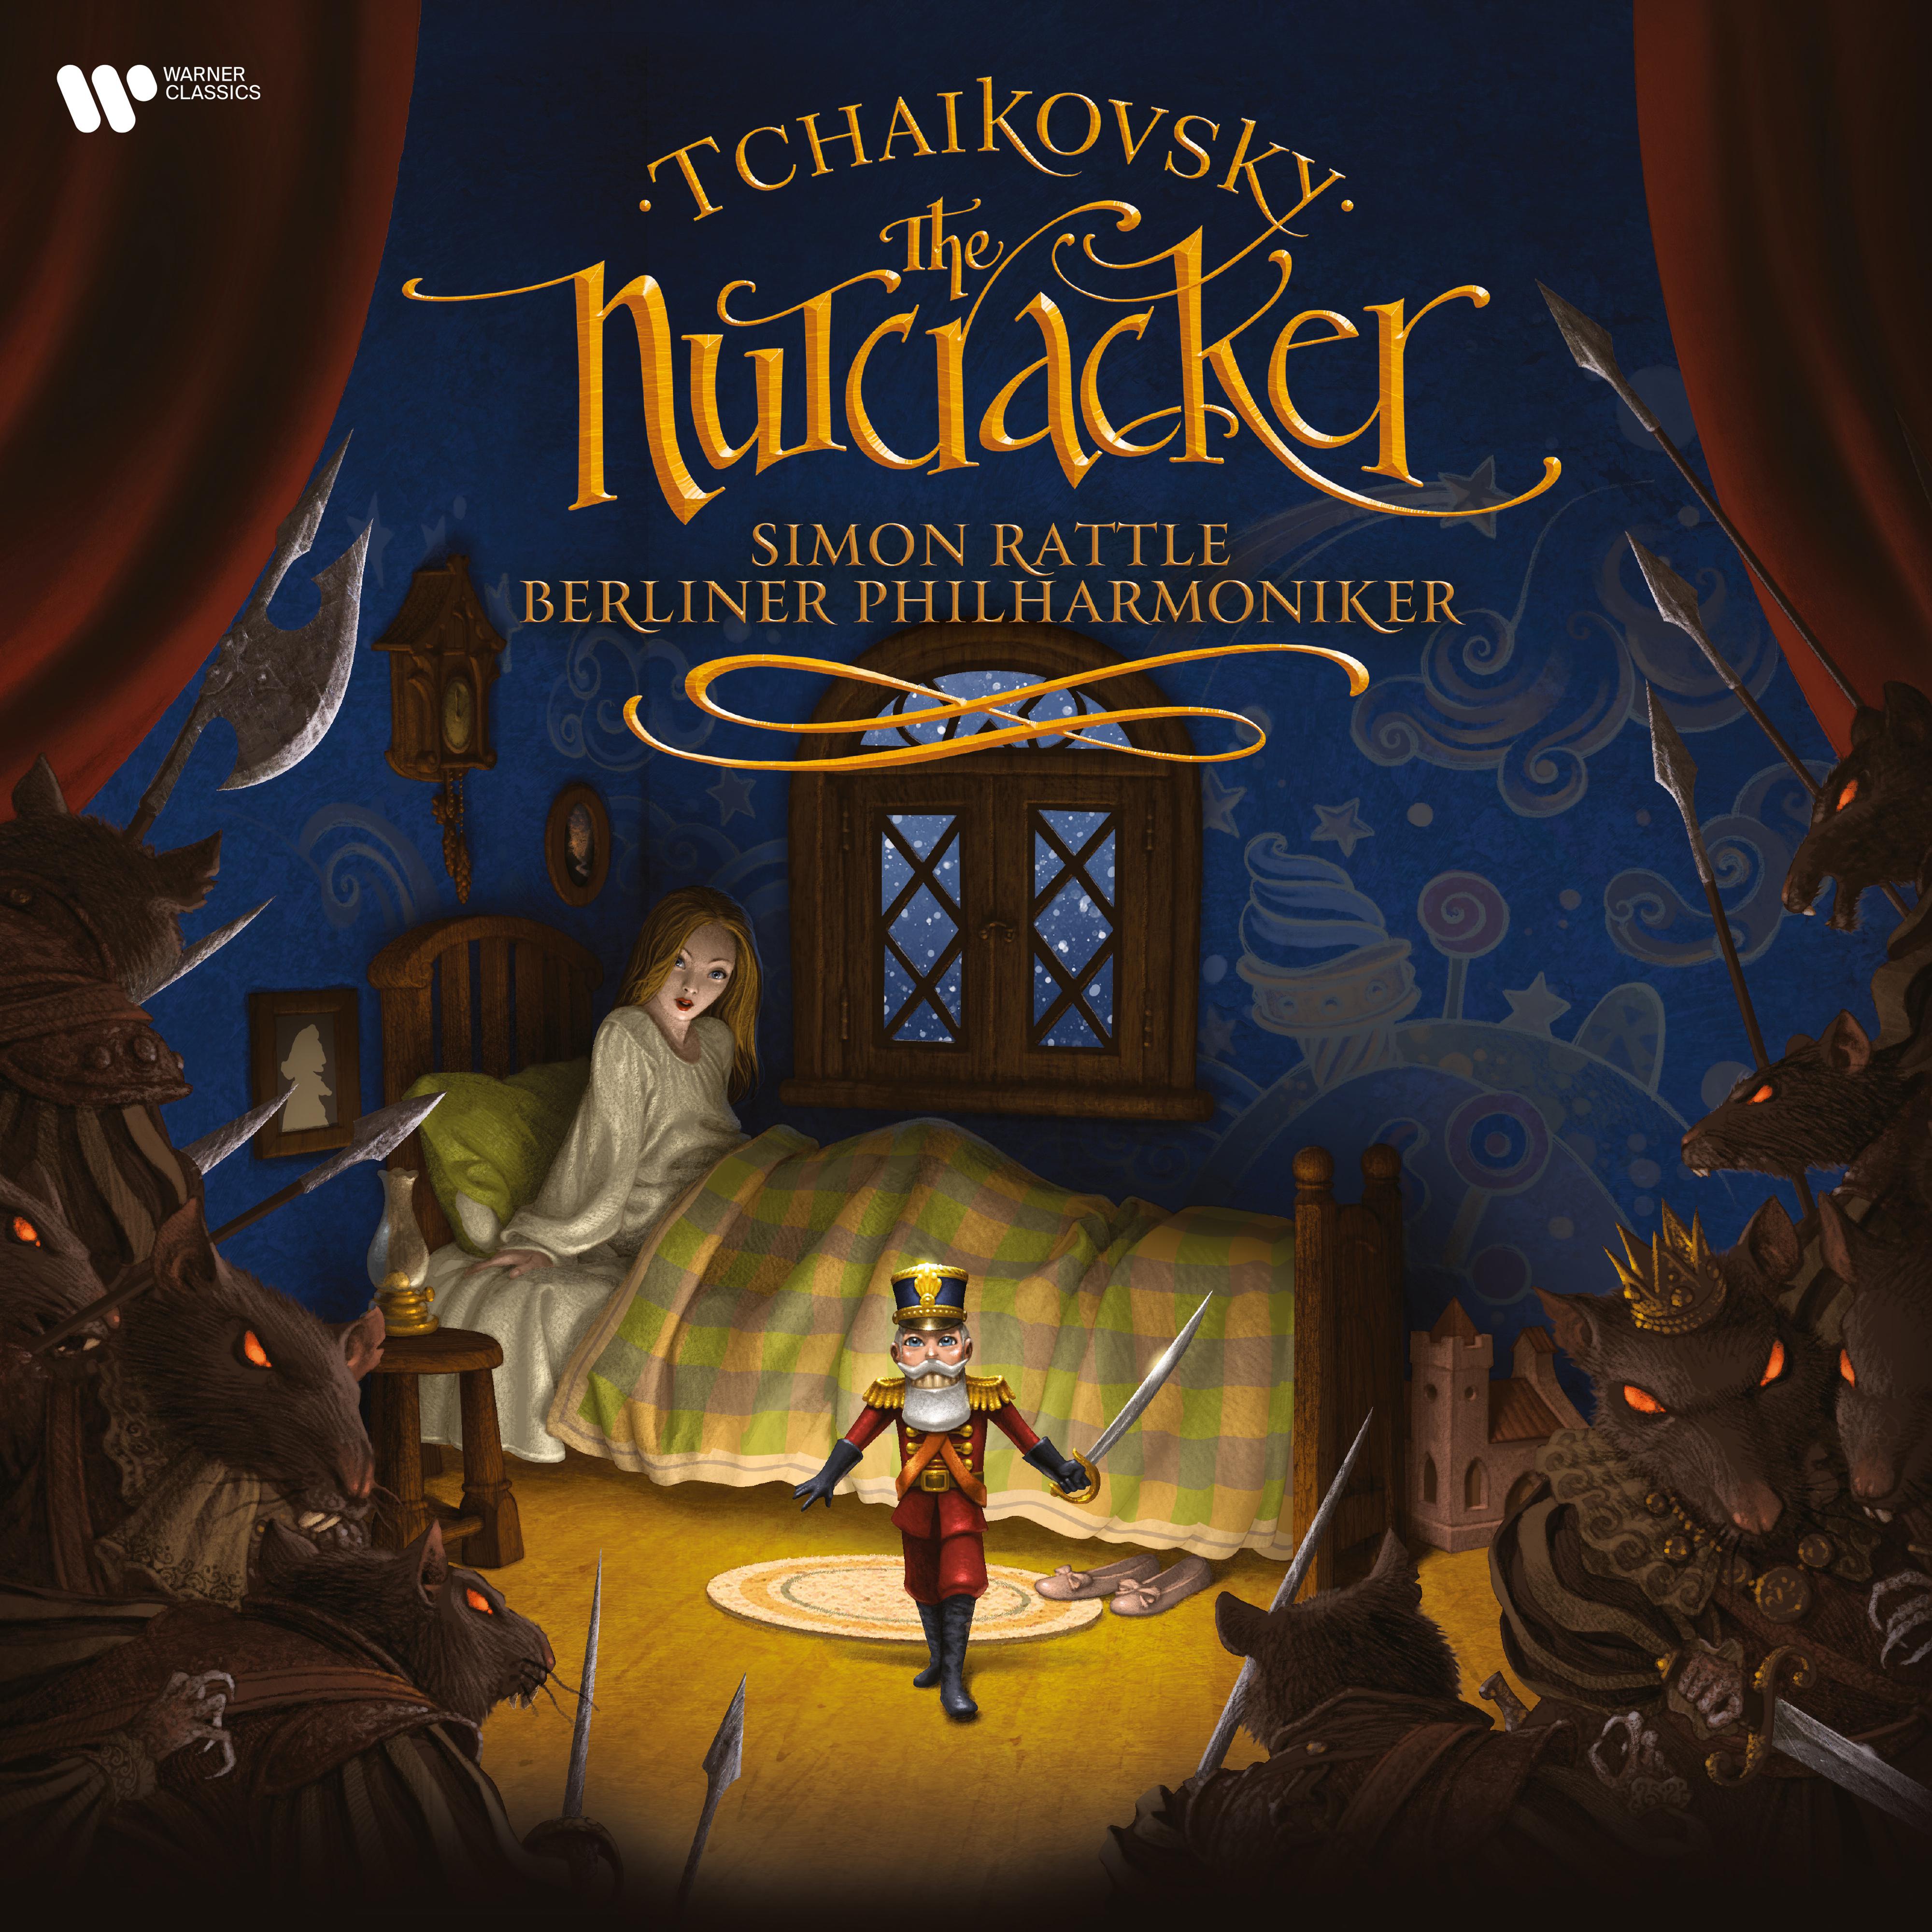 The Nutcracker, Op. 71, Act 2:No. 13 Waltz of the Flowers